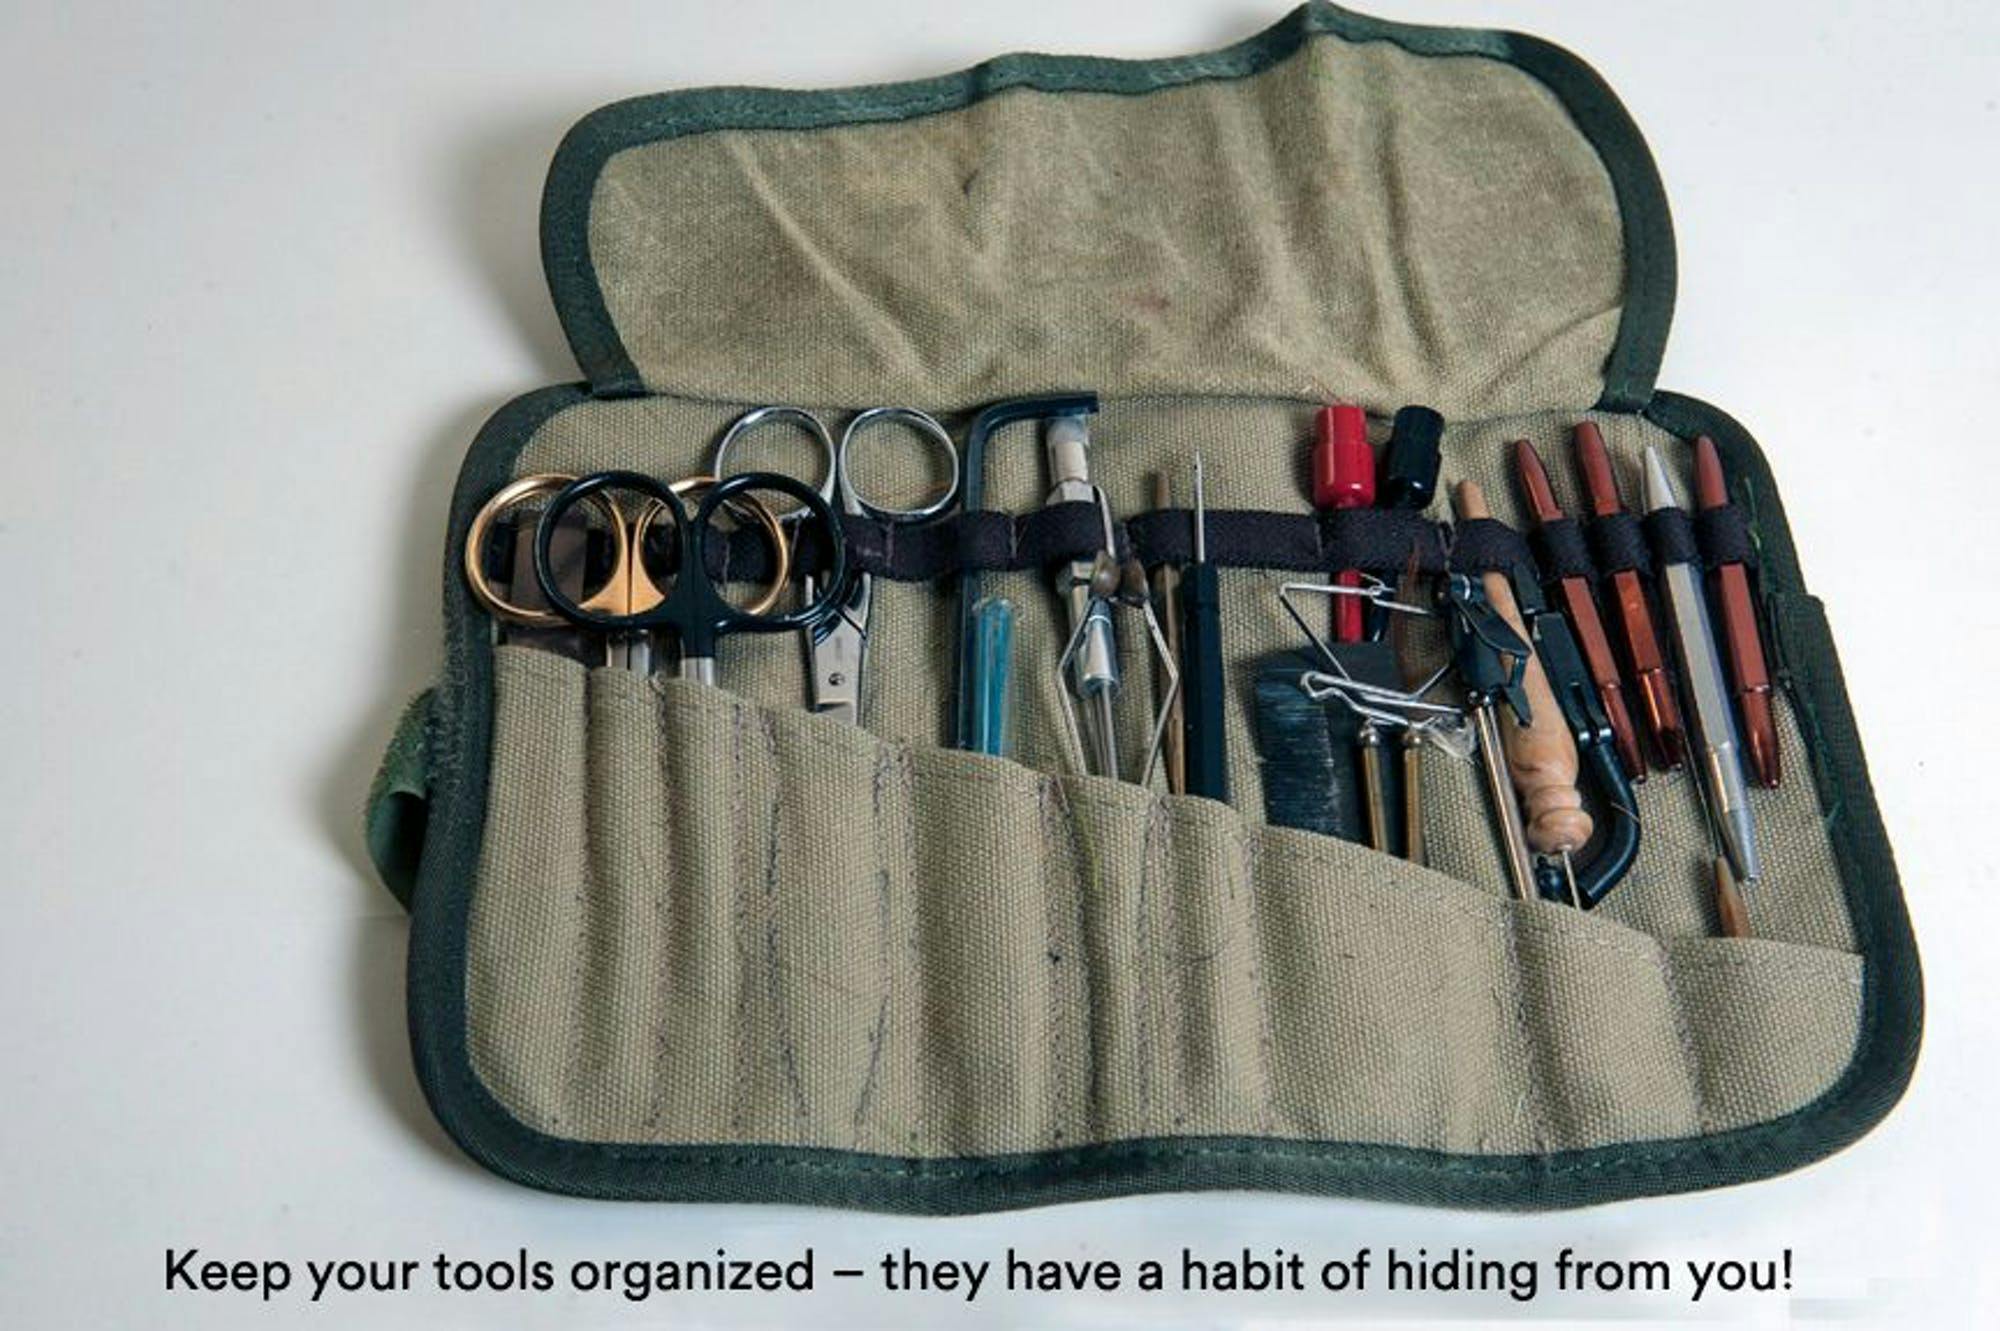 An image of a tool pouch with the text, "Keep your tools organized — they have a habit of hiding from you!"